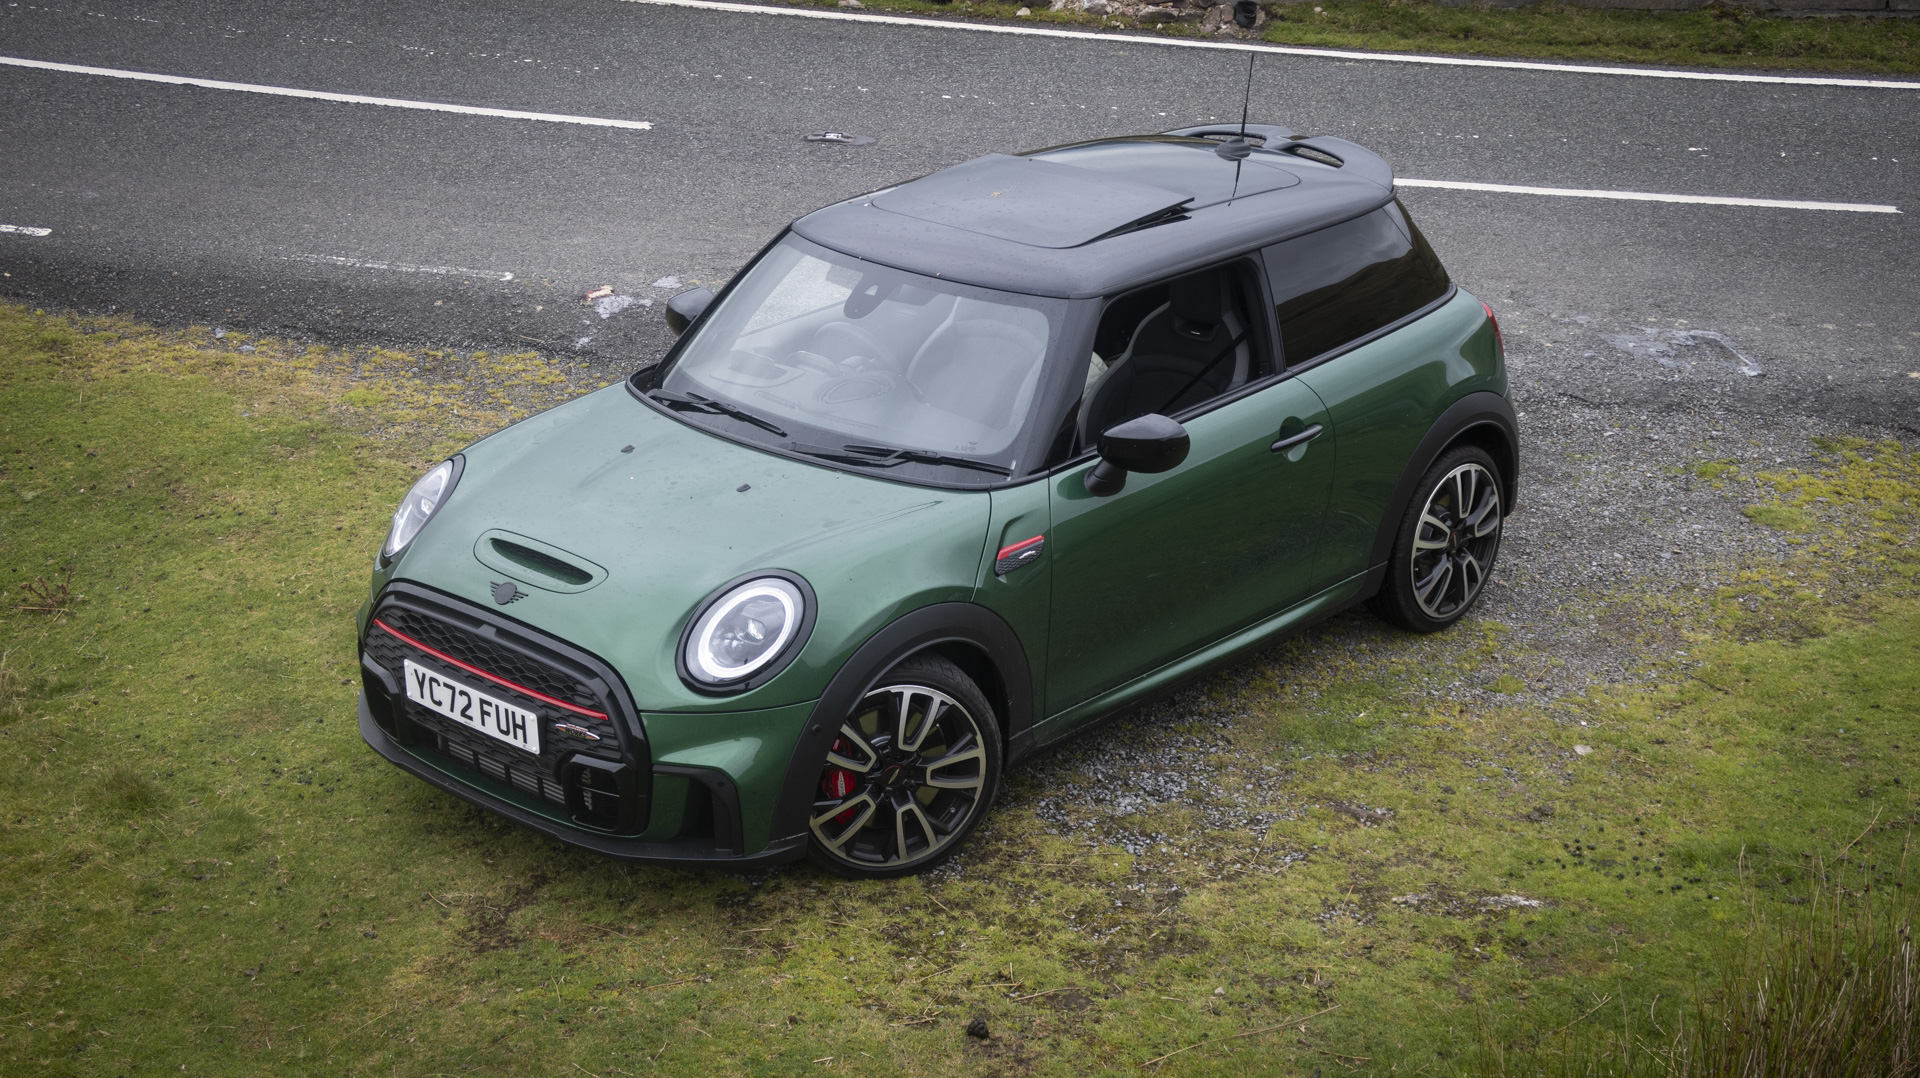 They may not be microcars anymore, but I still think Mini's design does well. <em>Andrew P. Collins</em>